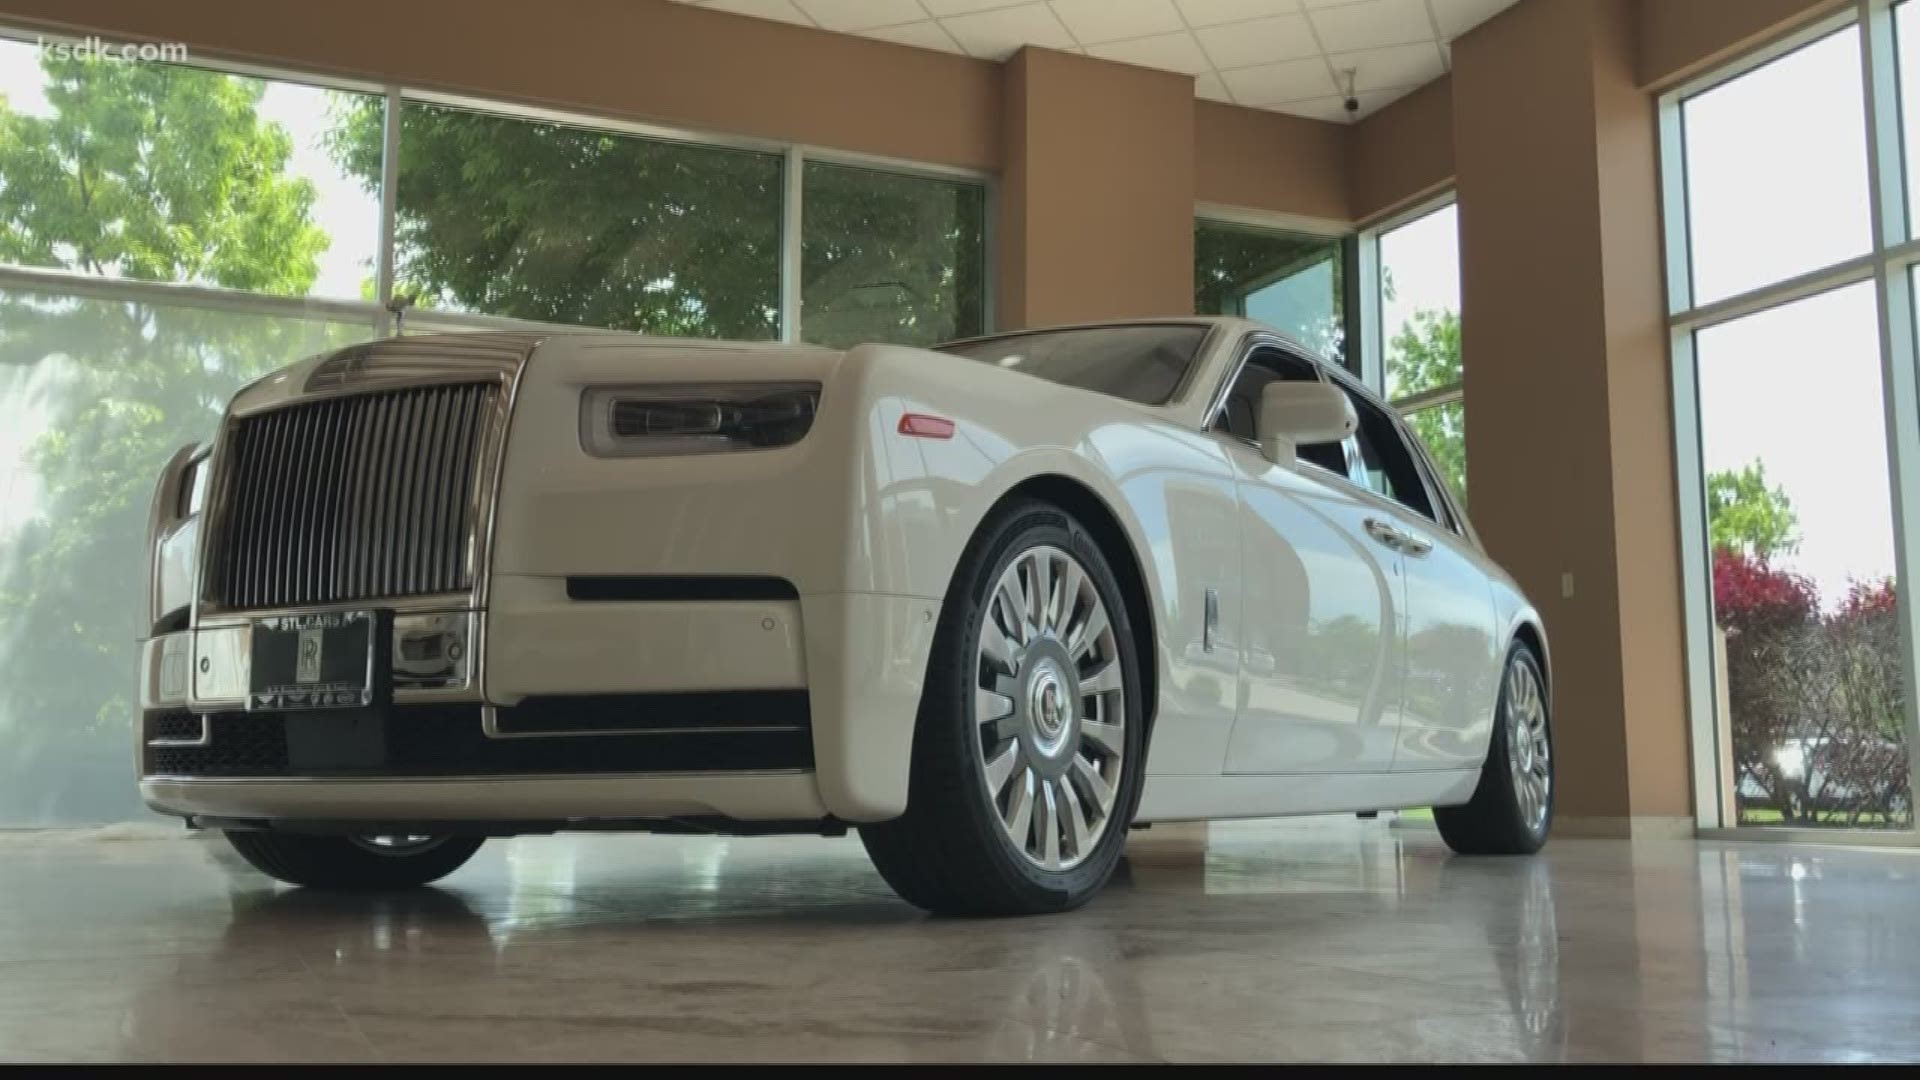 Monday is National Be a Millionaire Day, and what says big bucks more than having a sweet ride? Graham Hill of STL Motorcars showed us a car that might be one of the most luxurious on the road: the Rolls-Royce Phantom.